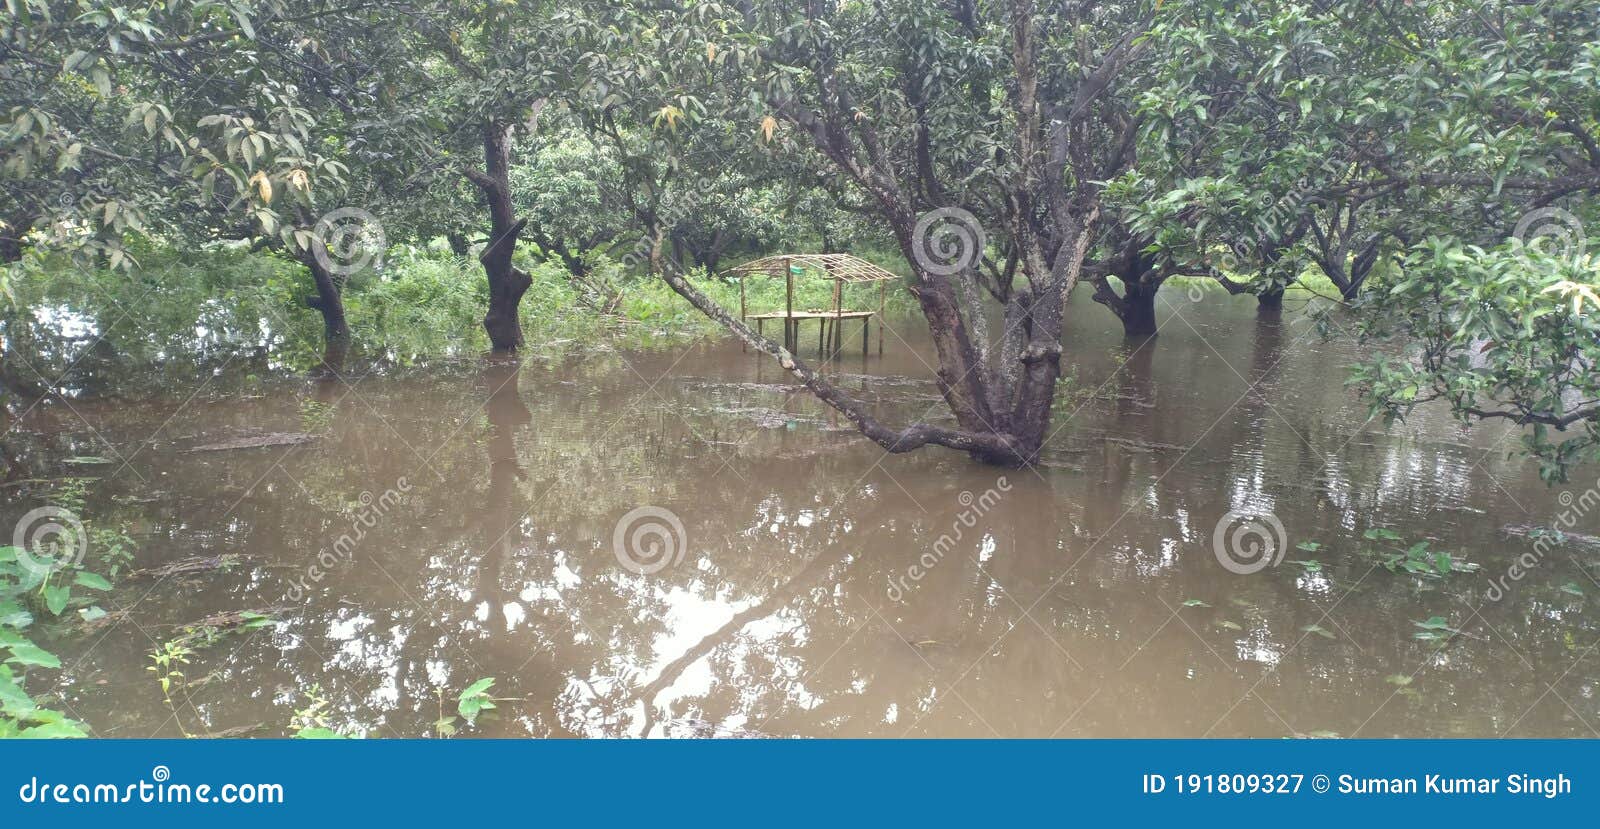 all agriculture land just overlaped and tree and plant rounded by waterby water during flooding in madhubani india